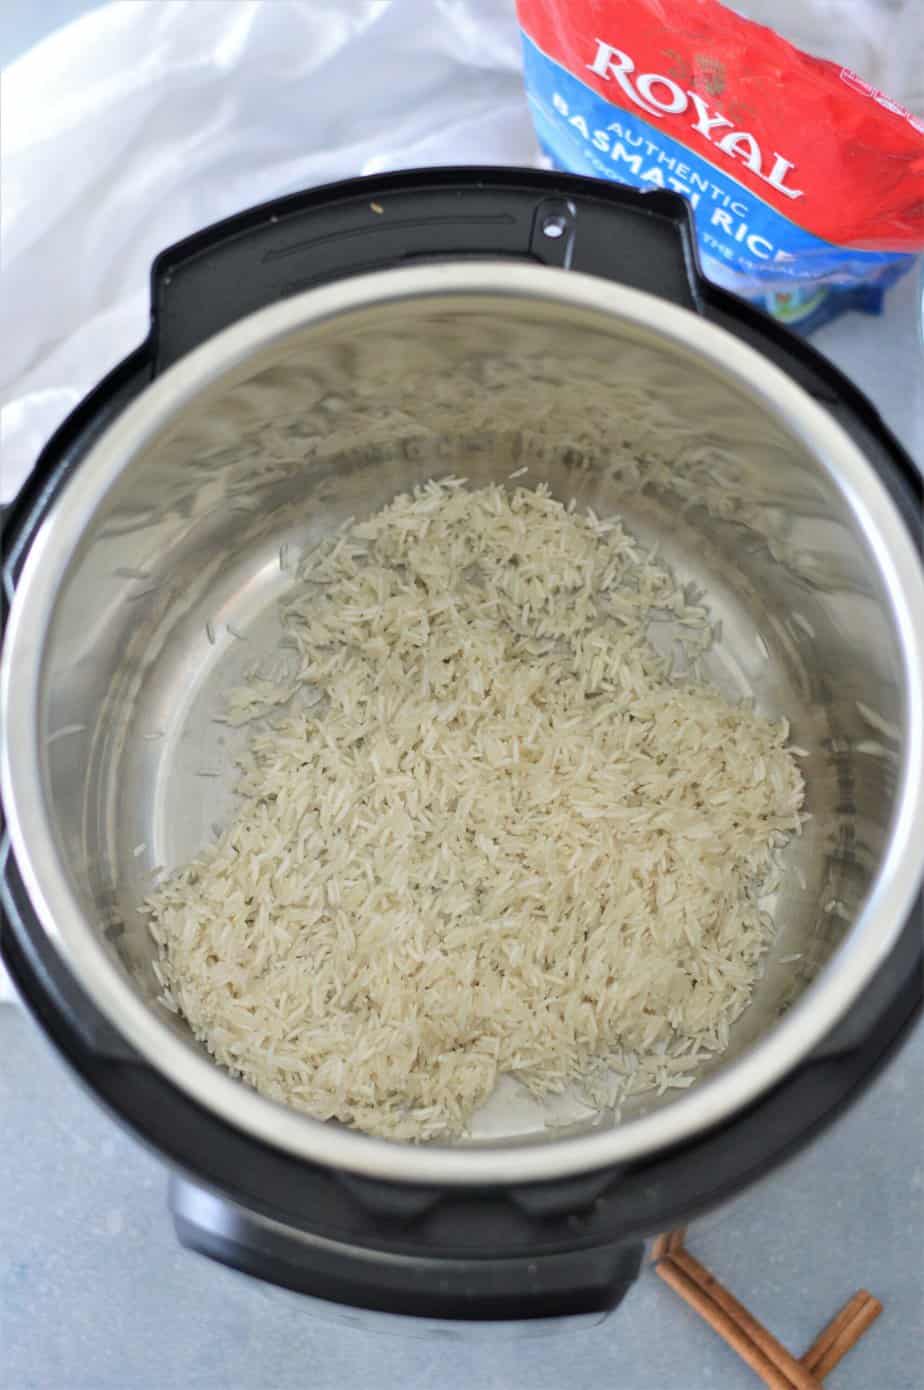 rinsed Basmati rice in instant pot with towel and cinnamon stick in background